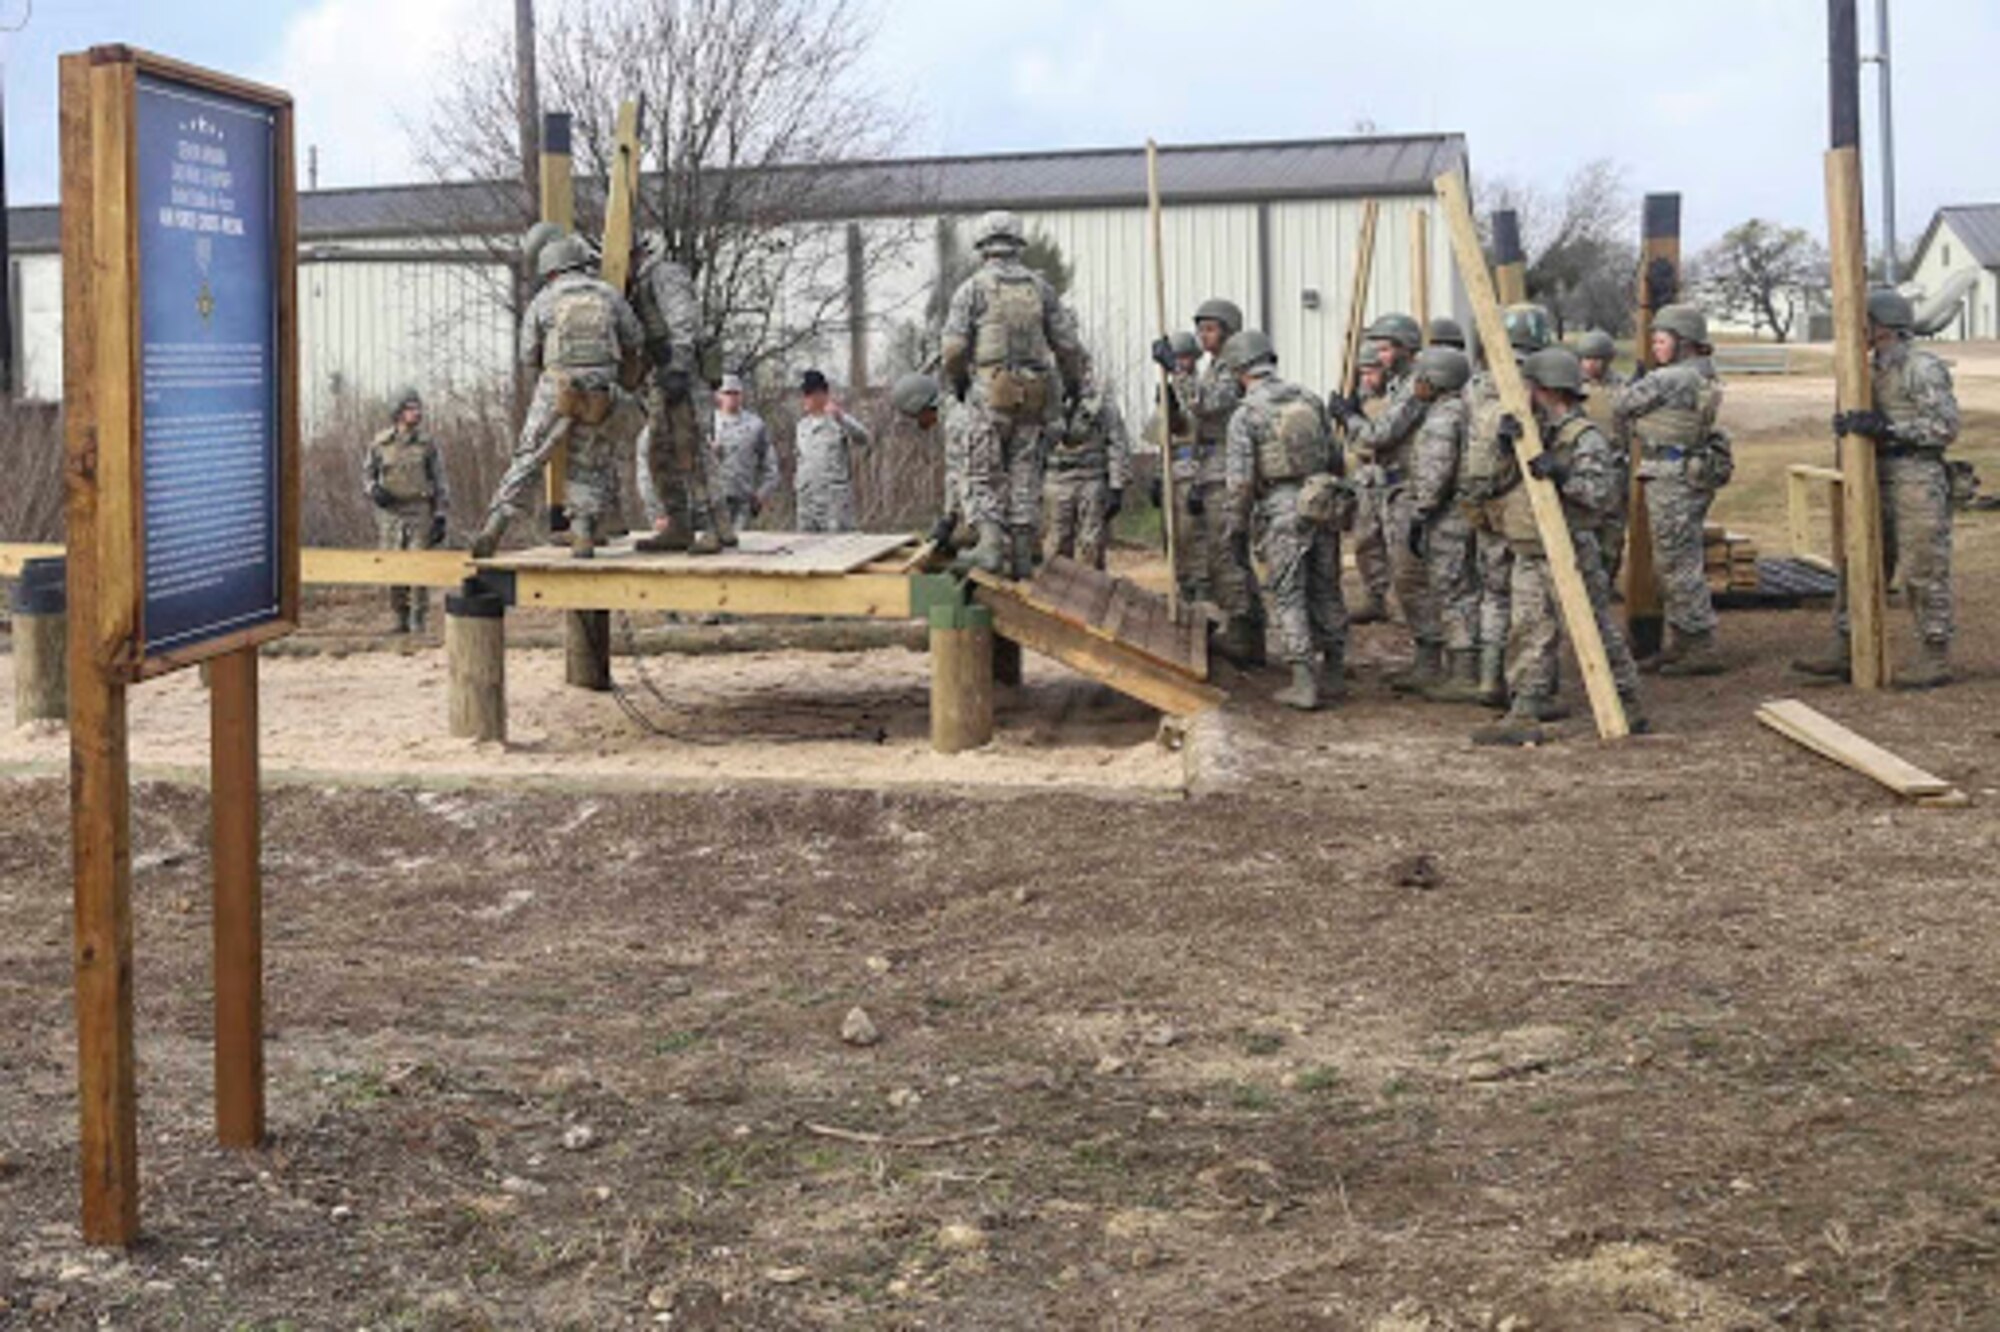 BMT Obstacle Course